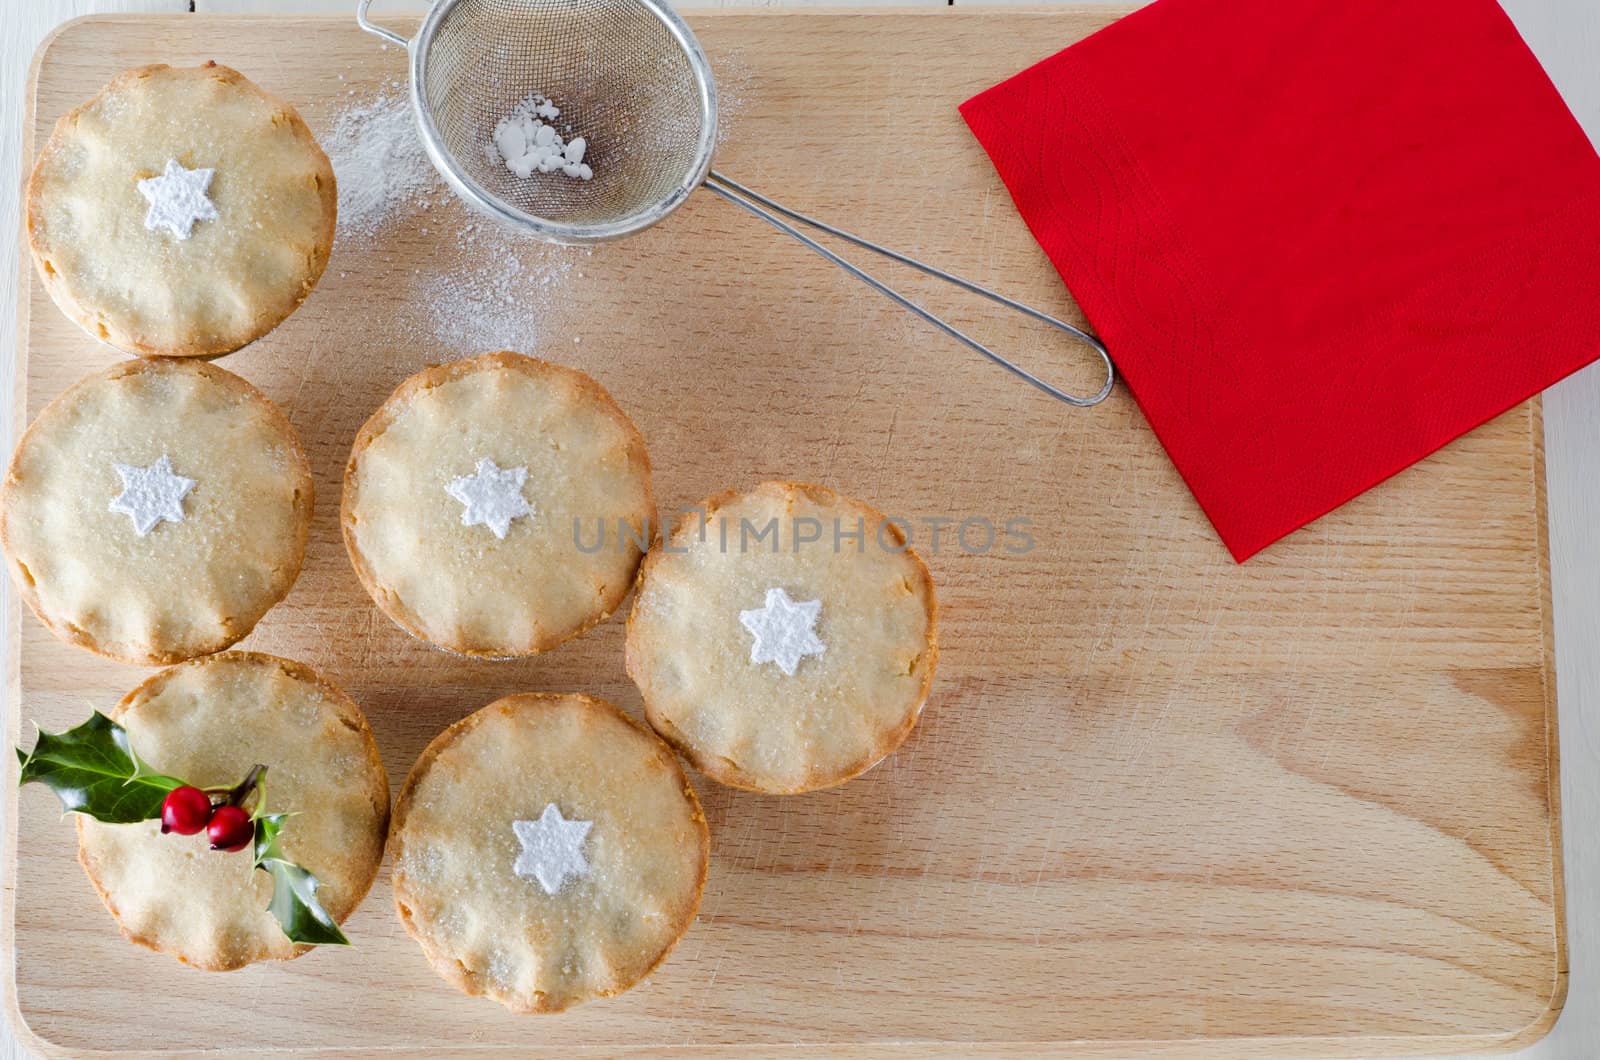 Overhead shot of mince pies decorated with holly sprig and sifted icing sugar in star shapes.  An old tea straining sieve sits on wooden board with sprinkled icing sugar. Red napkin on upper right.